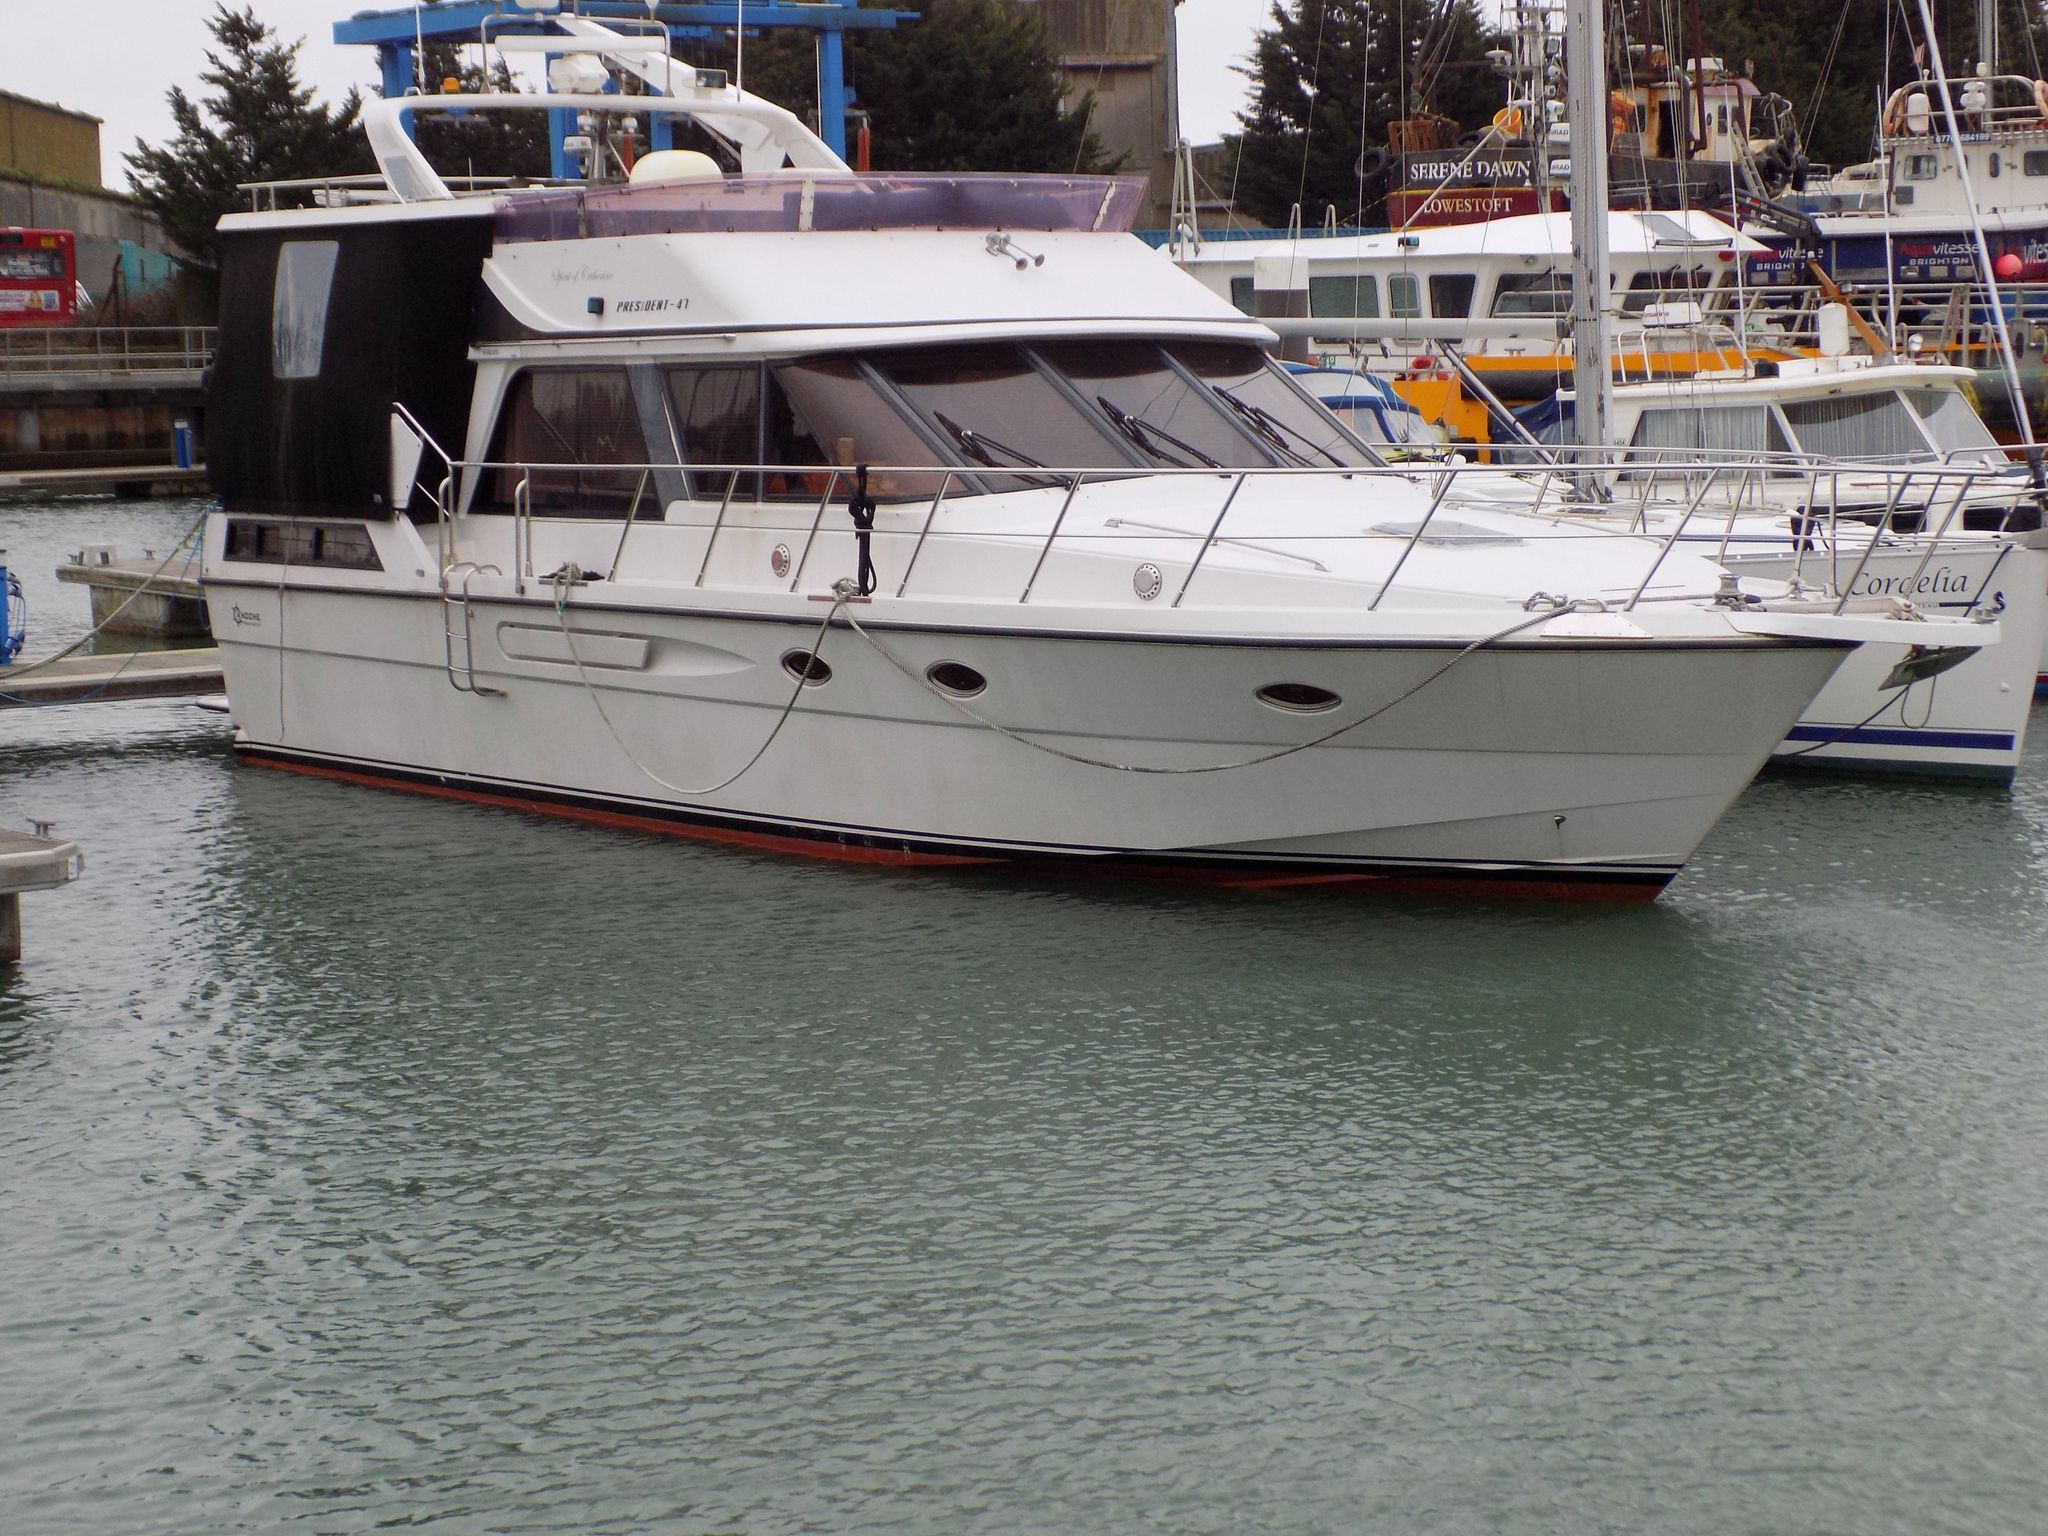 Canal and river cruiser boats for sale - boats.com